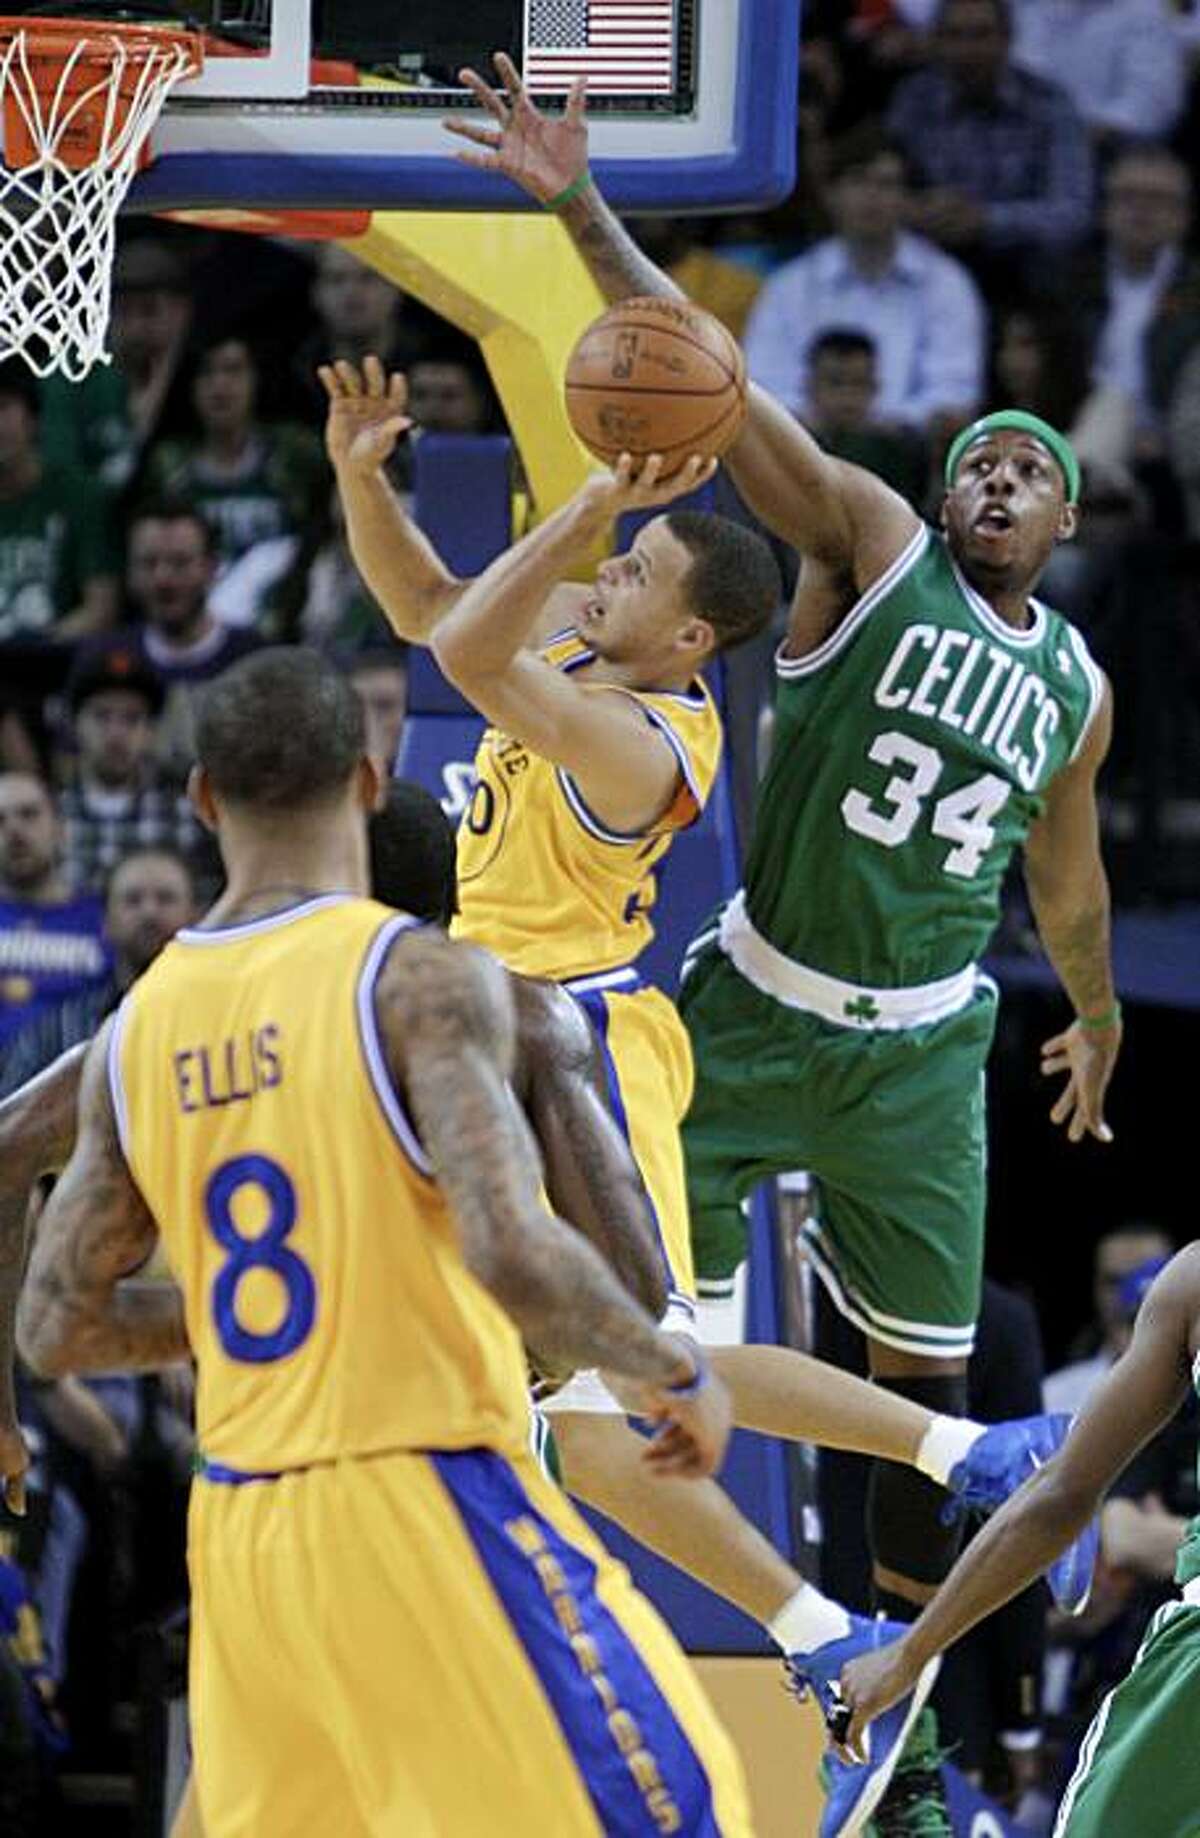 Boston Celtics' Paul Pierce (34) attempts to block the shot of Golden State Warriors' Stephen Curry during the first half of an NBA basketball game Tuesday, Feb. 22, 2011, in Oakland, Calif.